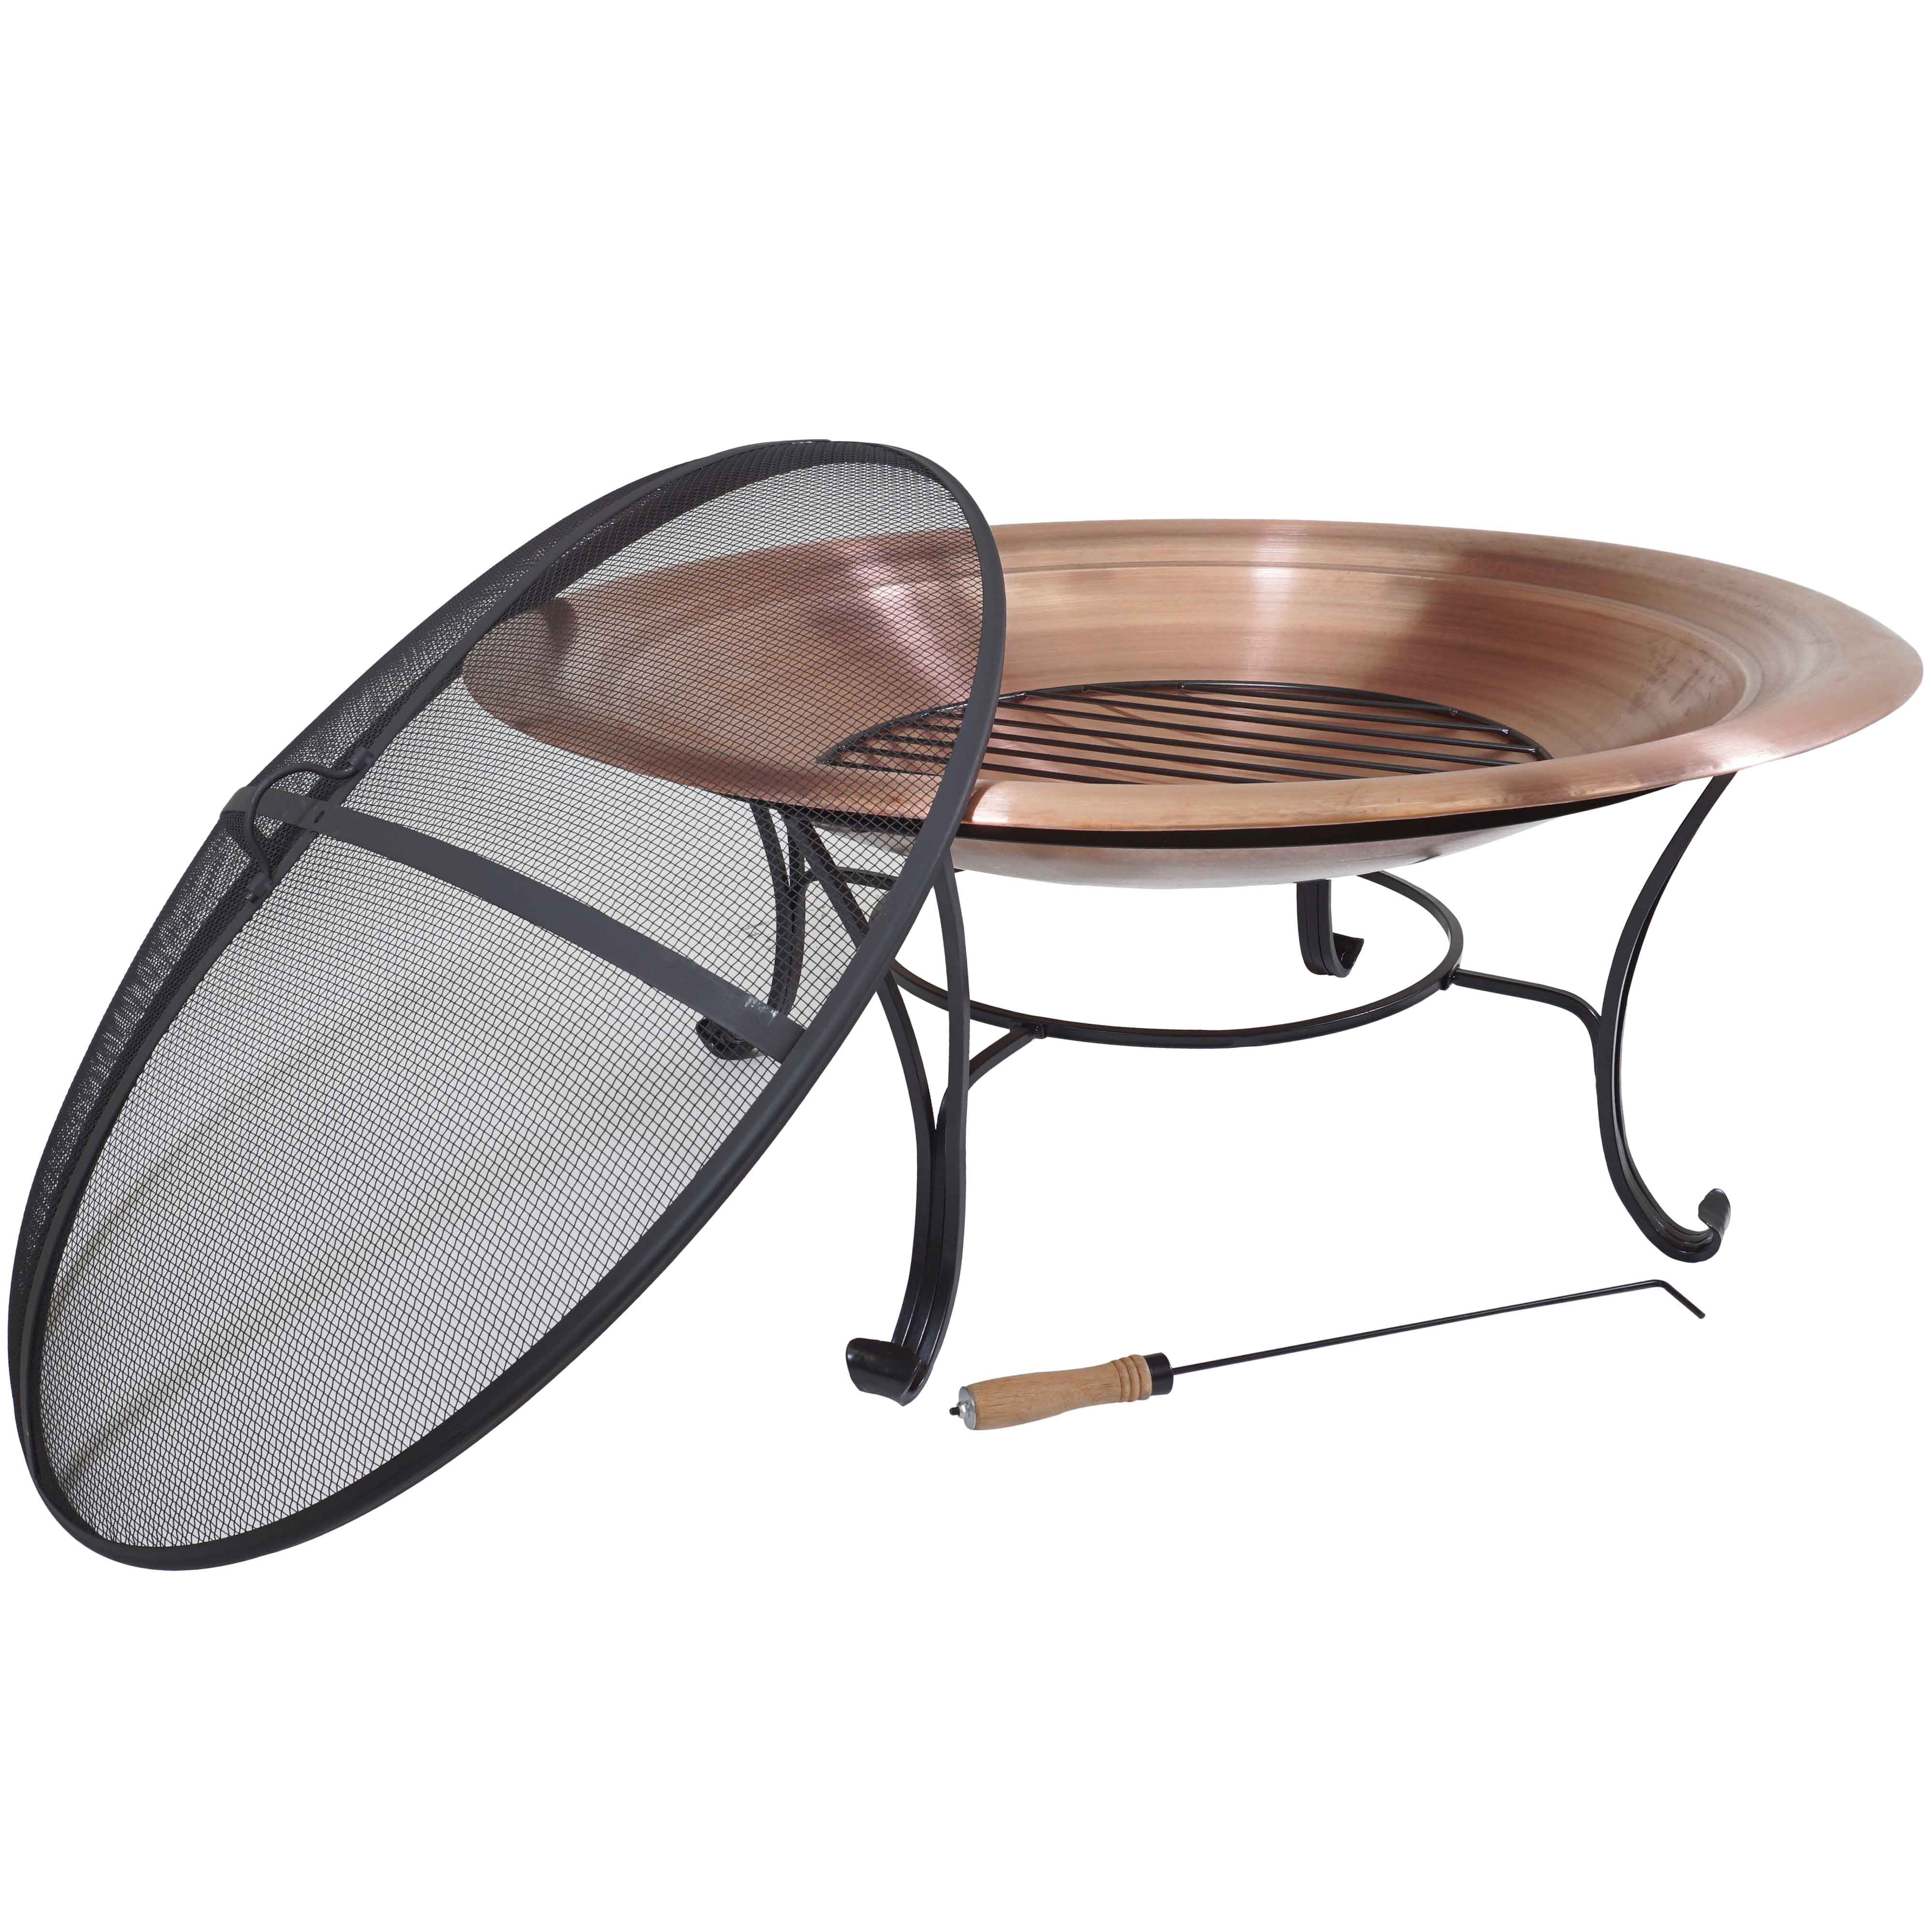 Copper Fire Pit Bowl Wood Burning Patio, Solid Copper Fire Pit